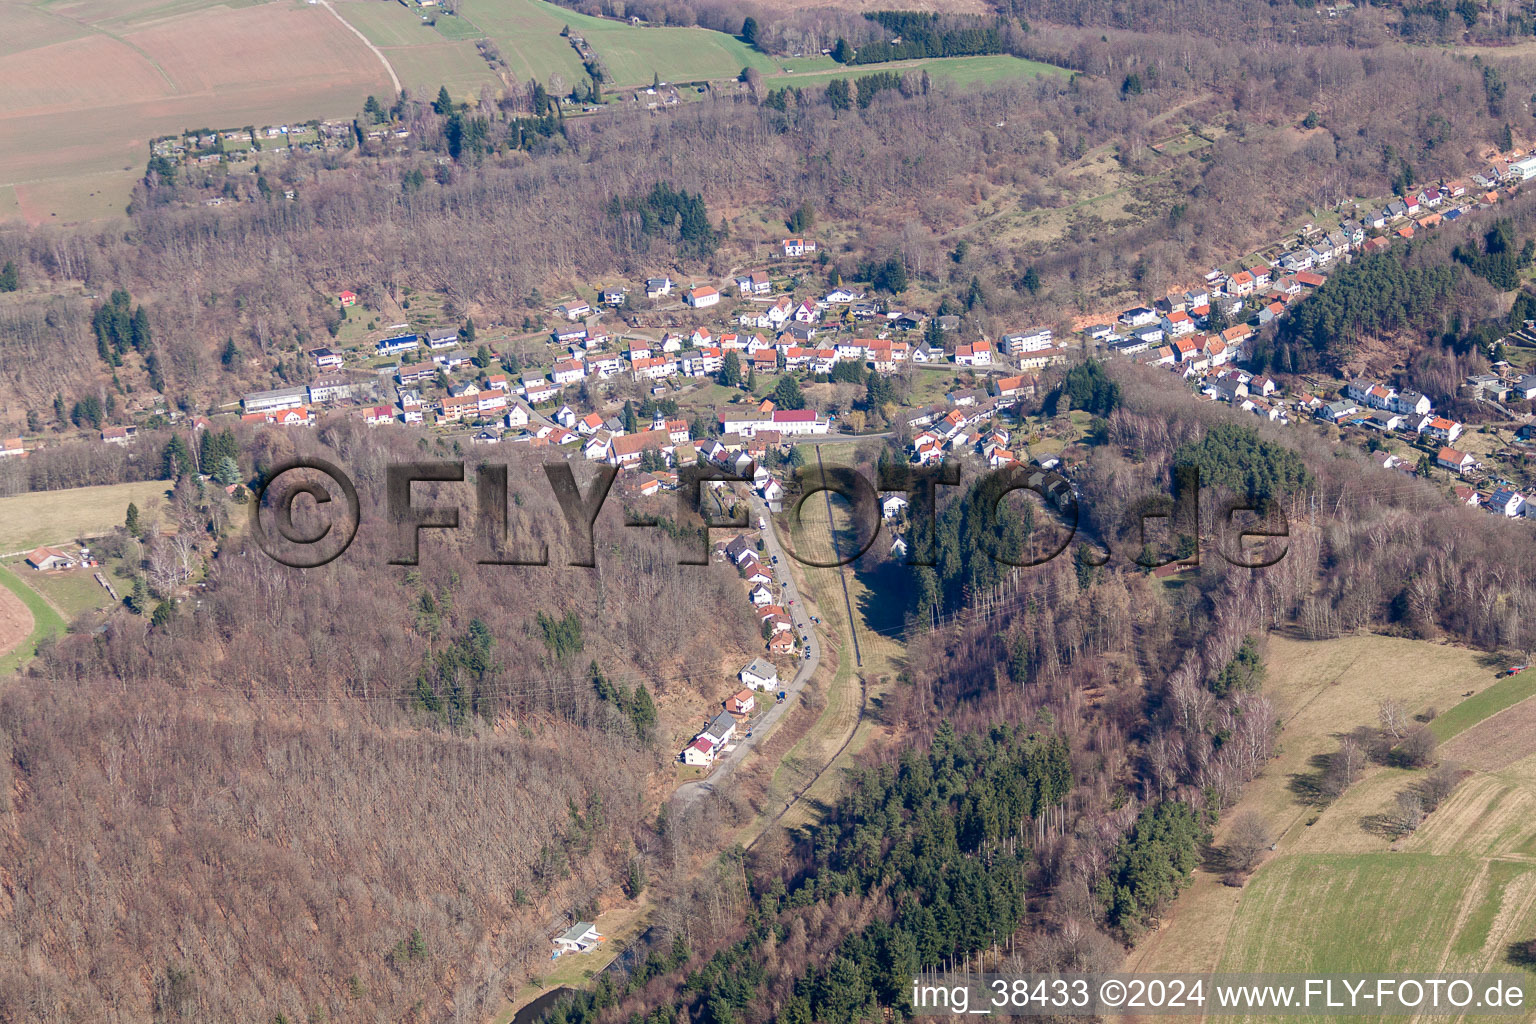 Village view in the district Niedersimten in Pirmasens in the state Rhineland-Palatinate, Germany